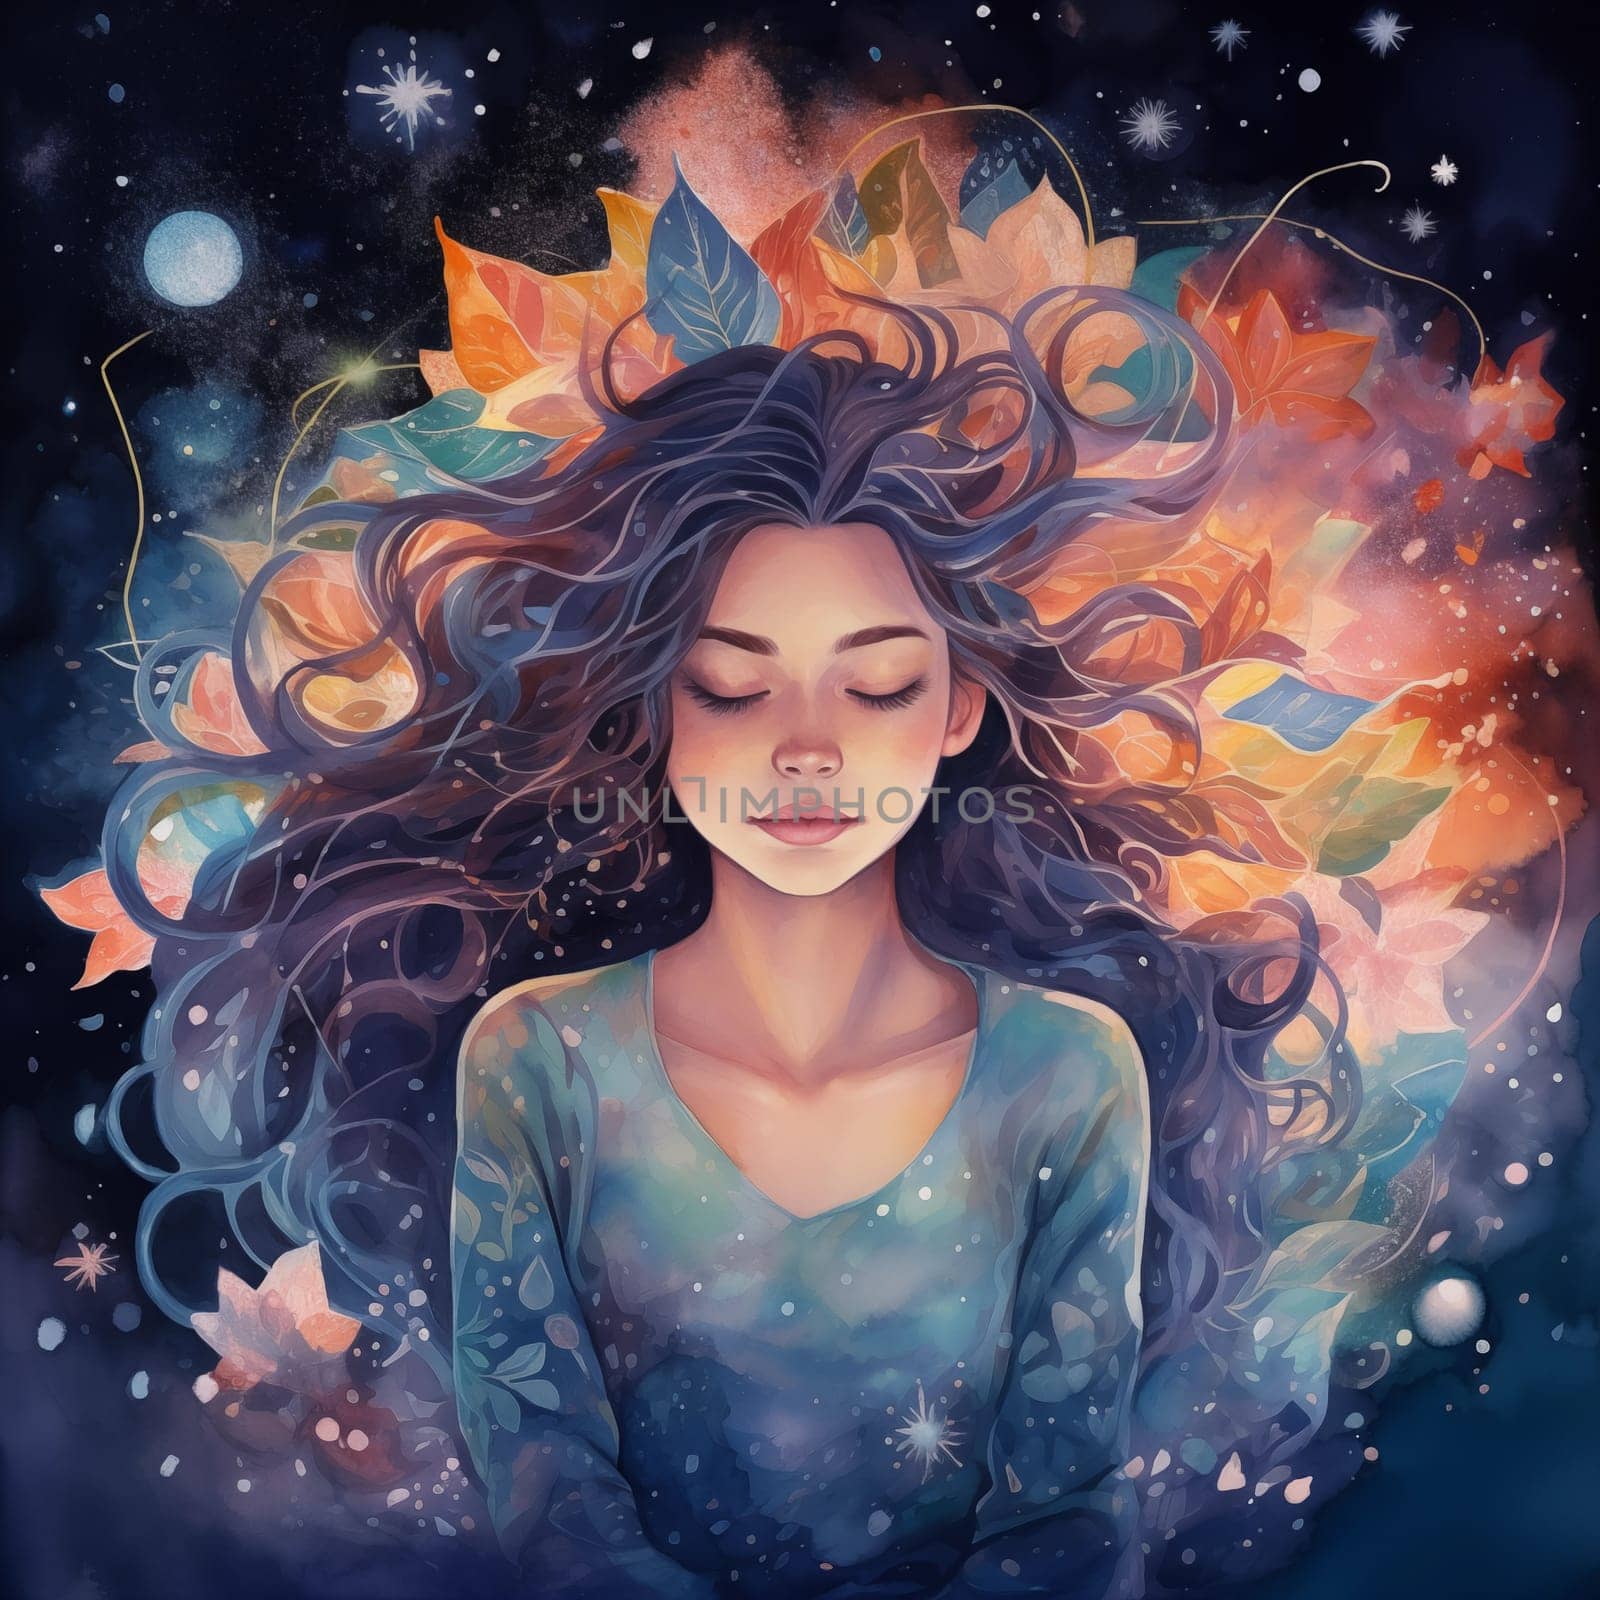 Mystical artwork: a girl in meditation with closed eyes against a cosmic backdrop with nebulae. Intricate leaf and flower patterns surround her, evoking a dreamy atmosphere in this illustrated scene.